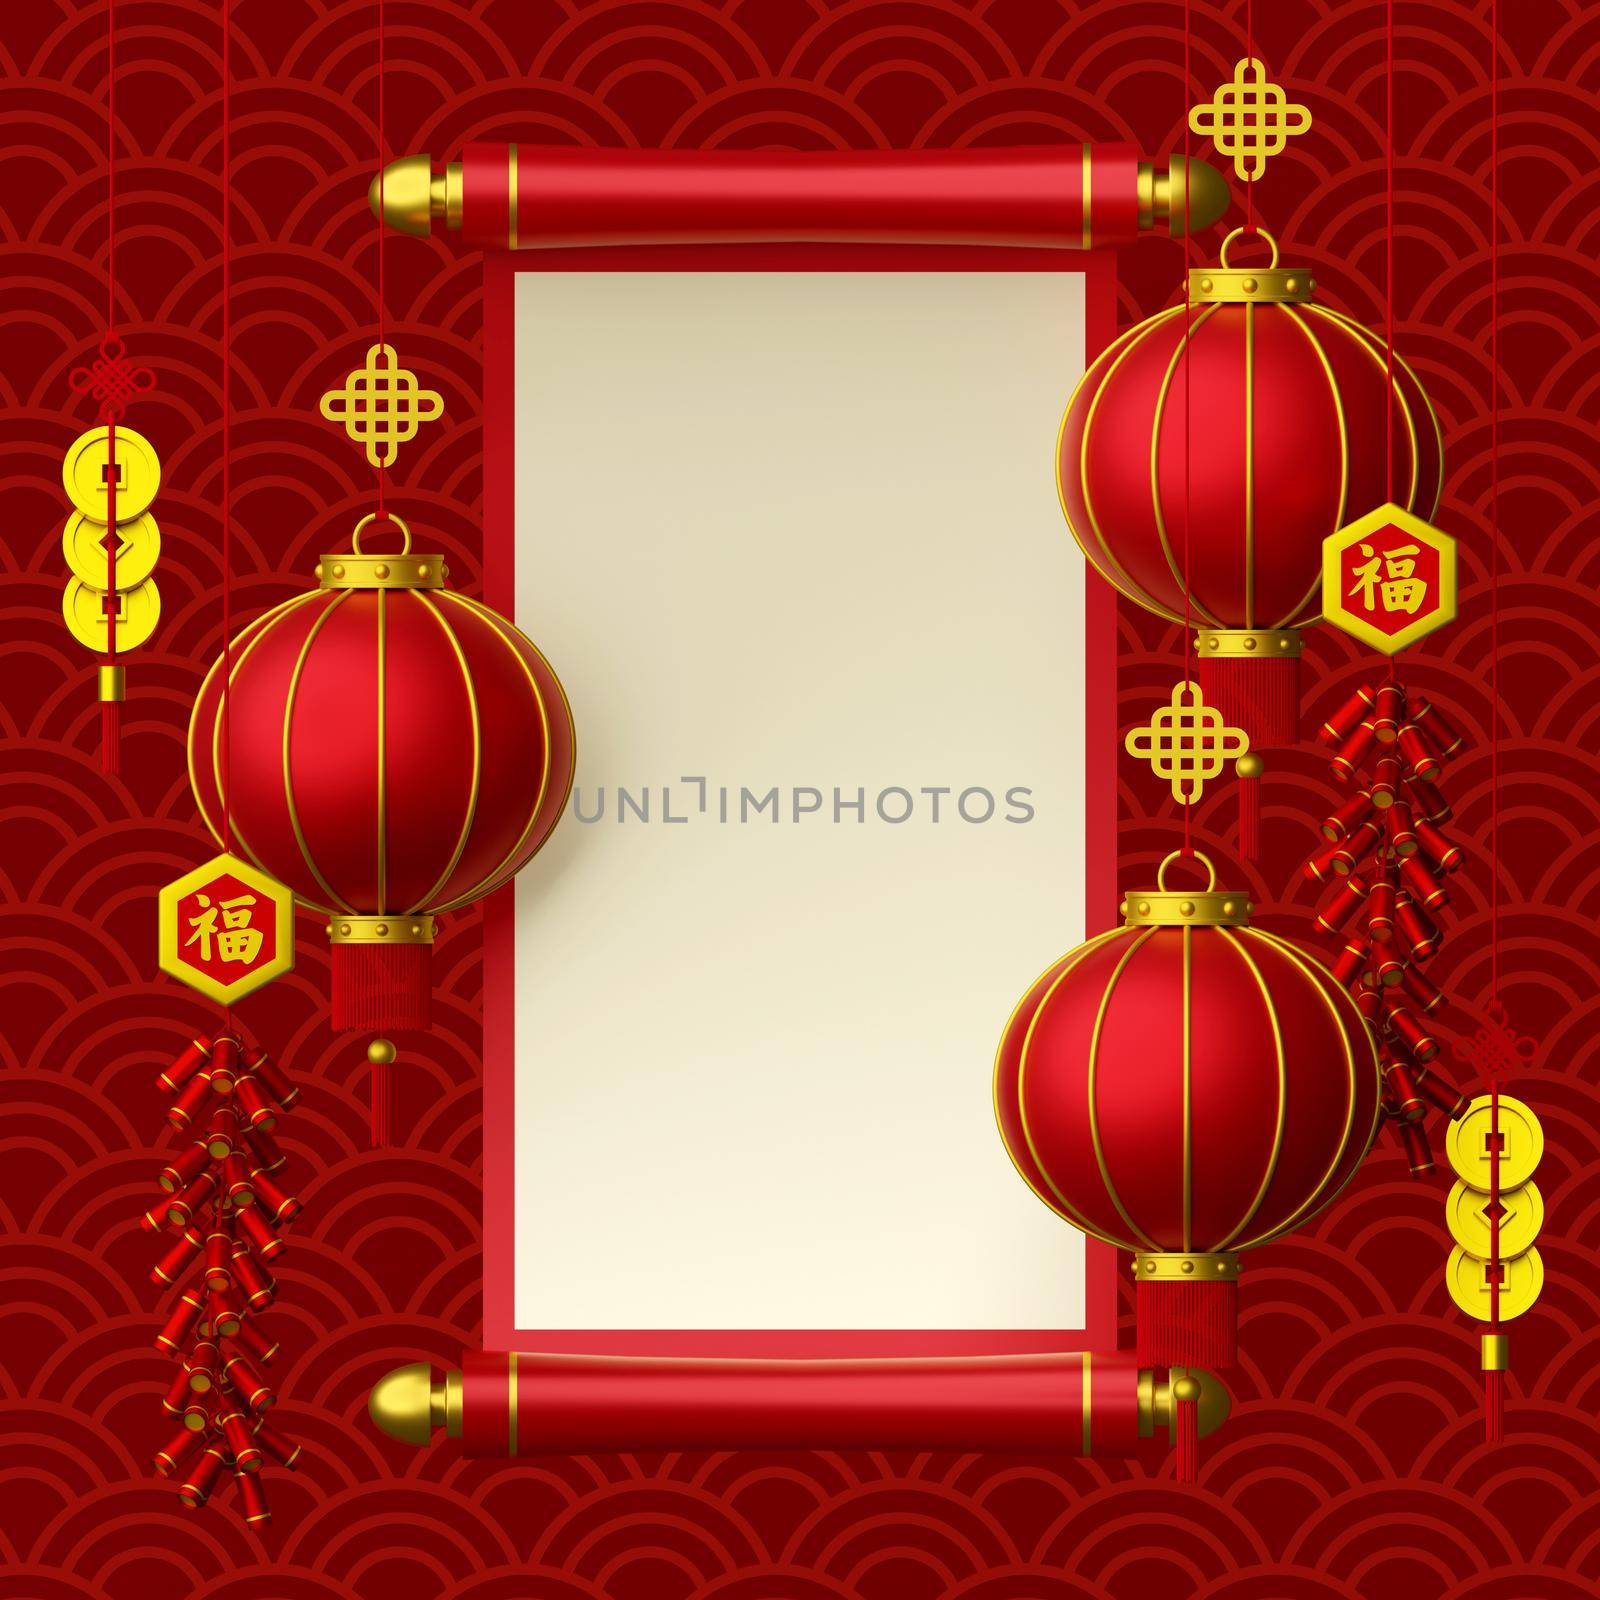 3d illustration of Chinese new year banner with Chinese scripture, hanging lantern, cracker and coin by nutzchotwarut